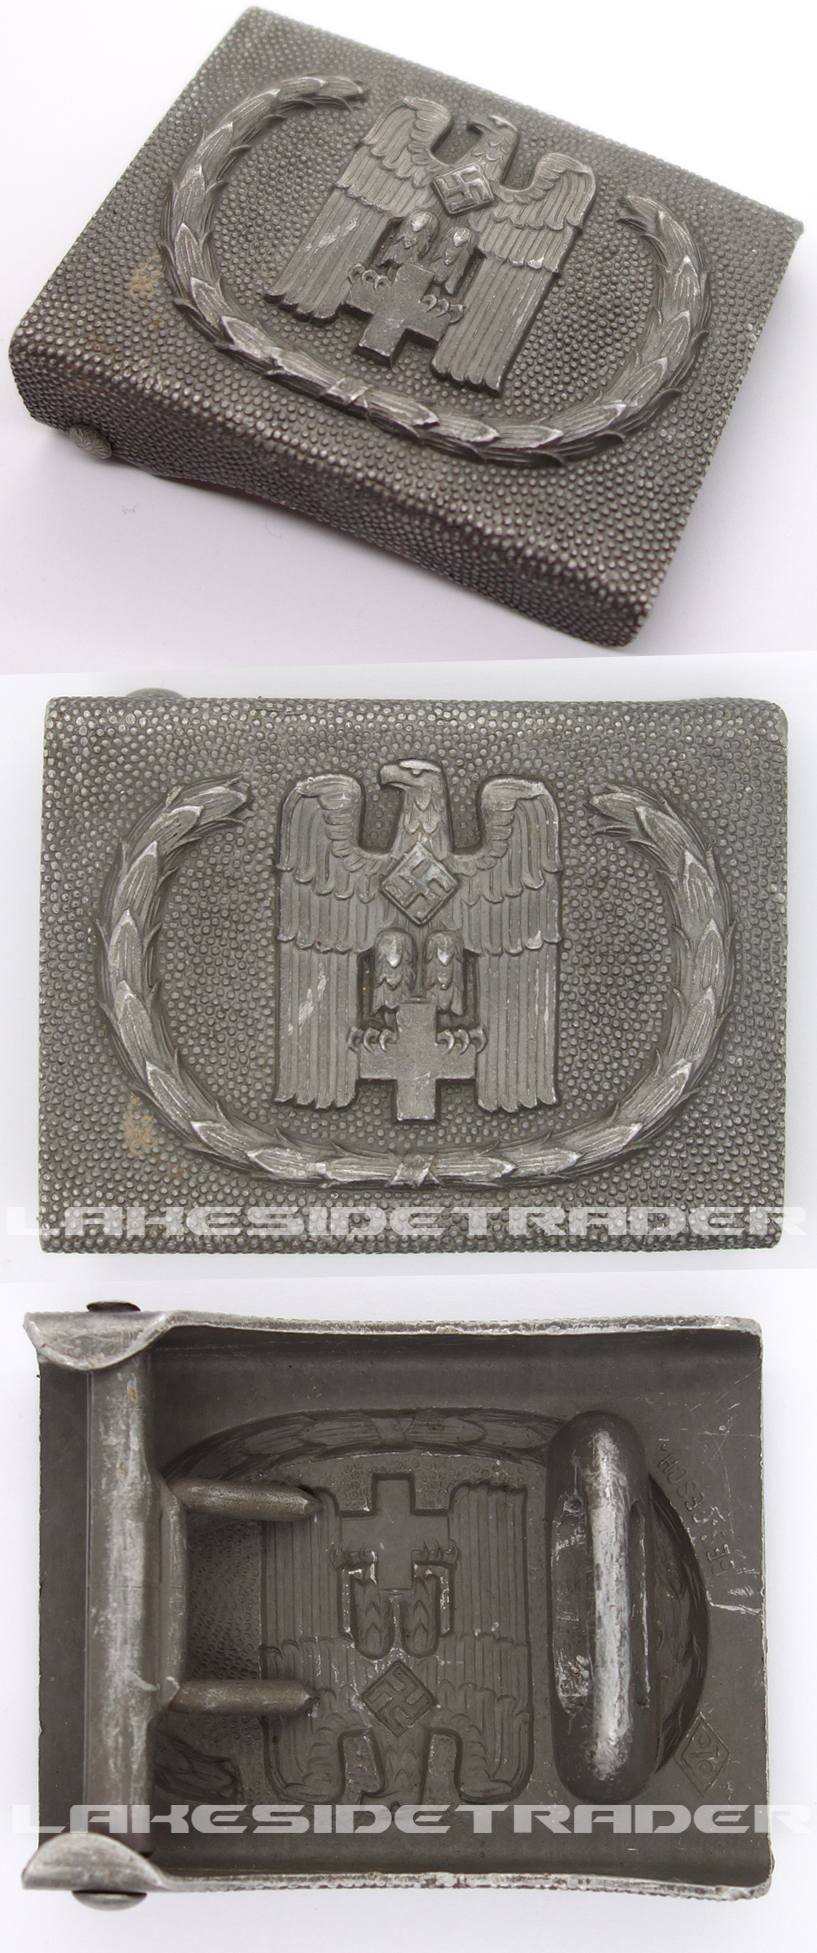 Red Cross Belt Buckle by Overhoff and co